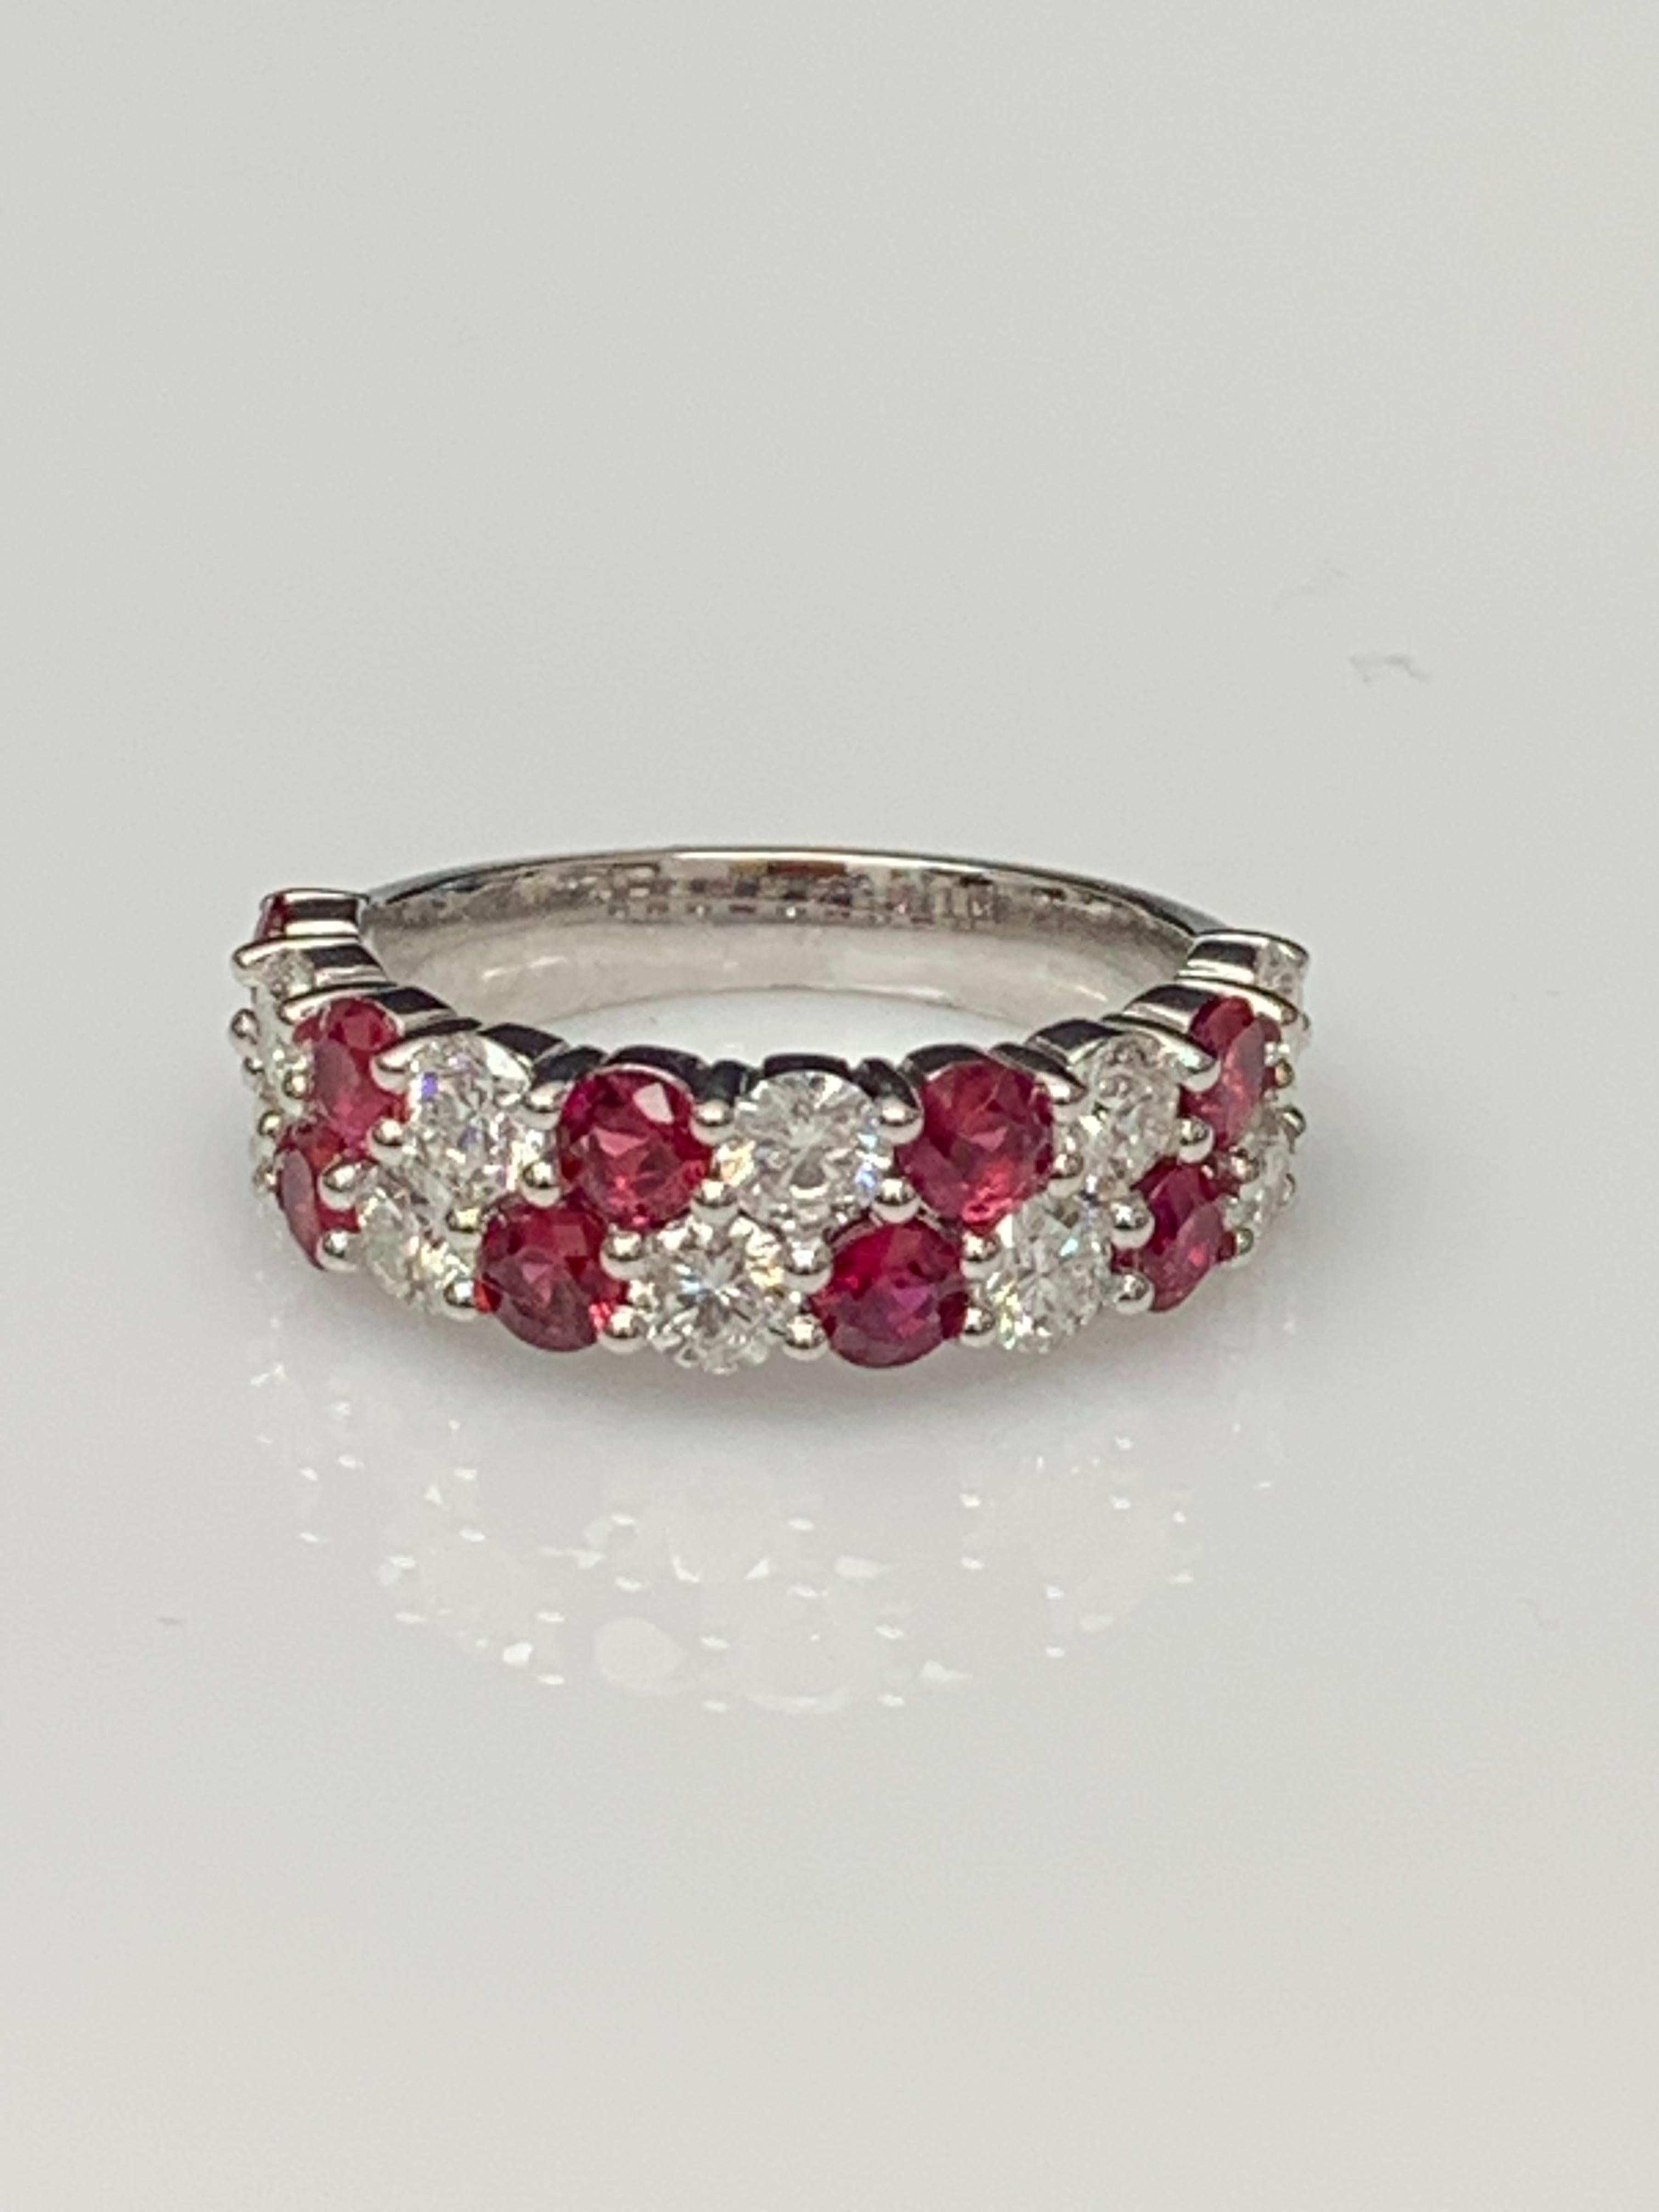 A unique and fashionable ZicZac ring showcasing two rows of round-shape 10 rubies and 9 diamonds, set in a band design. Rubies weigh 1.66 carats and Diamonds weigh 1.52 carats total. A brilliant and masterfully-made piece.

Style available in